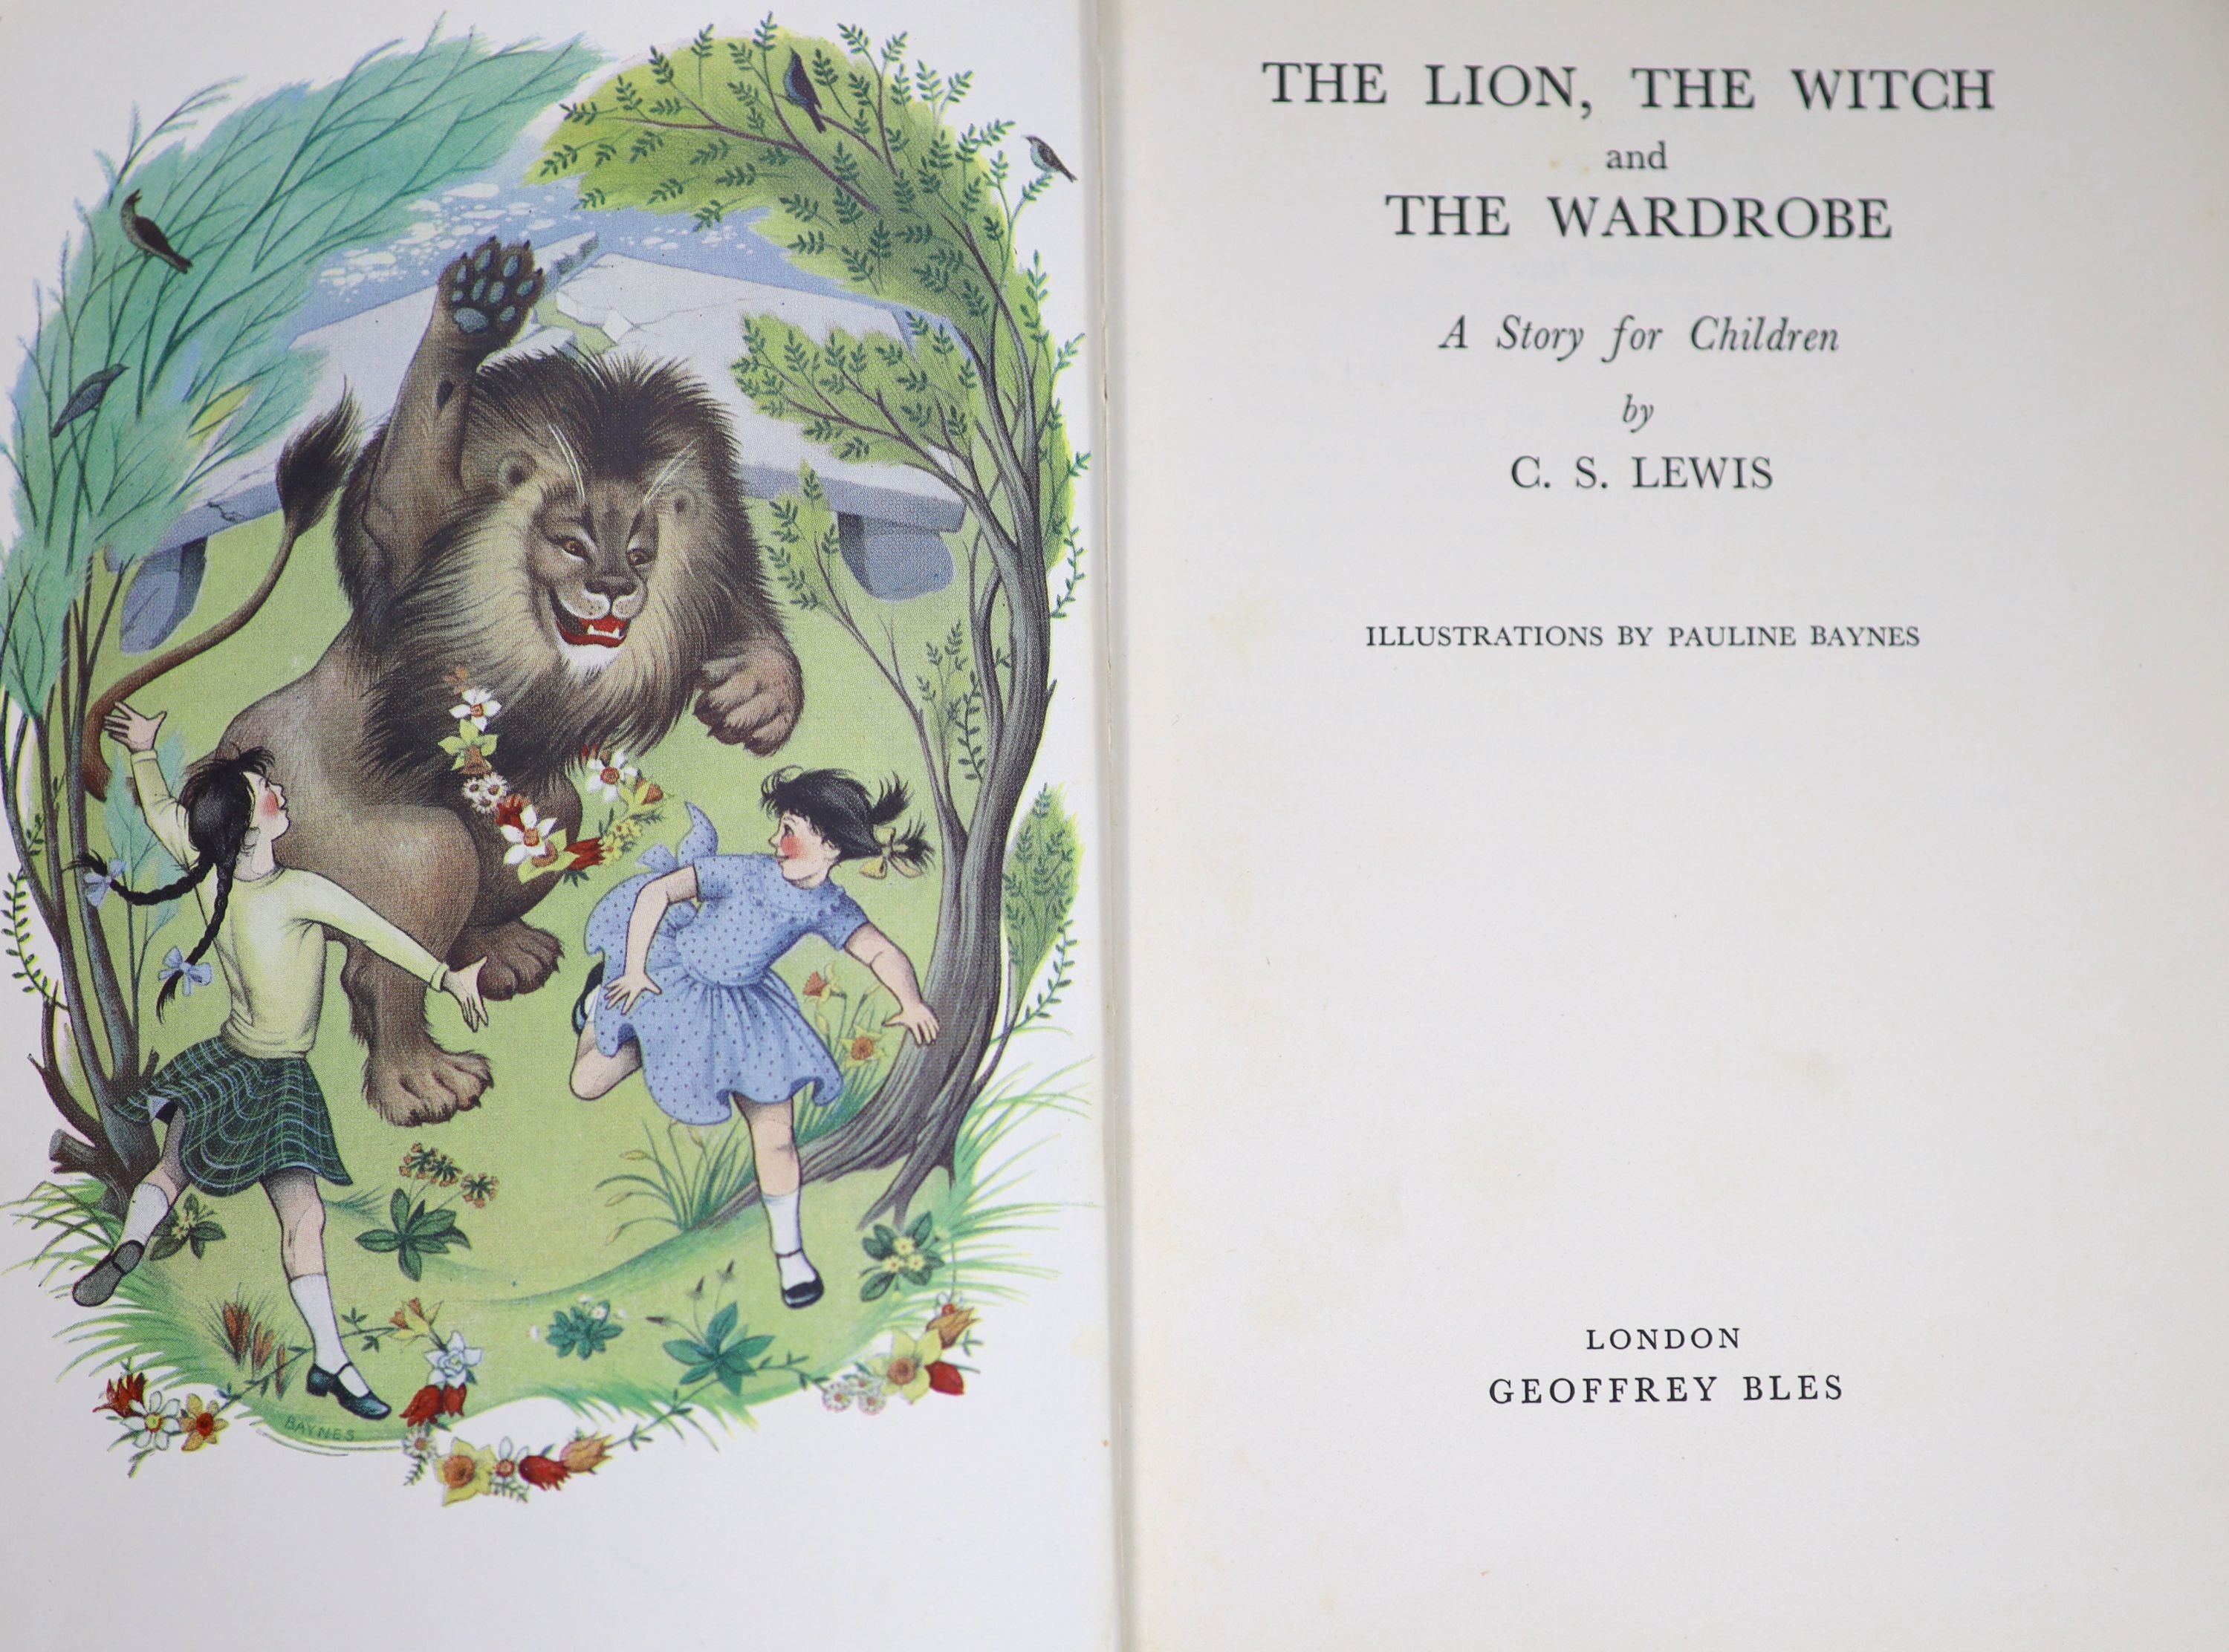 Lewis, Clive Staples - The Lion, the Witch and the Wardrobe,1st edition , 8vo, illustrated by Pauline Baynes, including a coloured frontis, original cloth with sunned spine, in unclipped, chipped, repaired d/j, Geoffrey